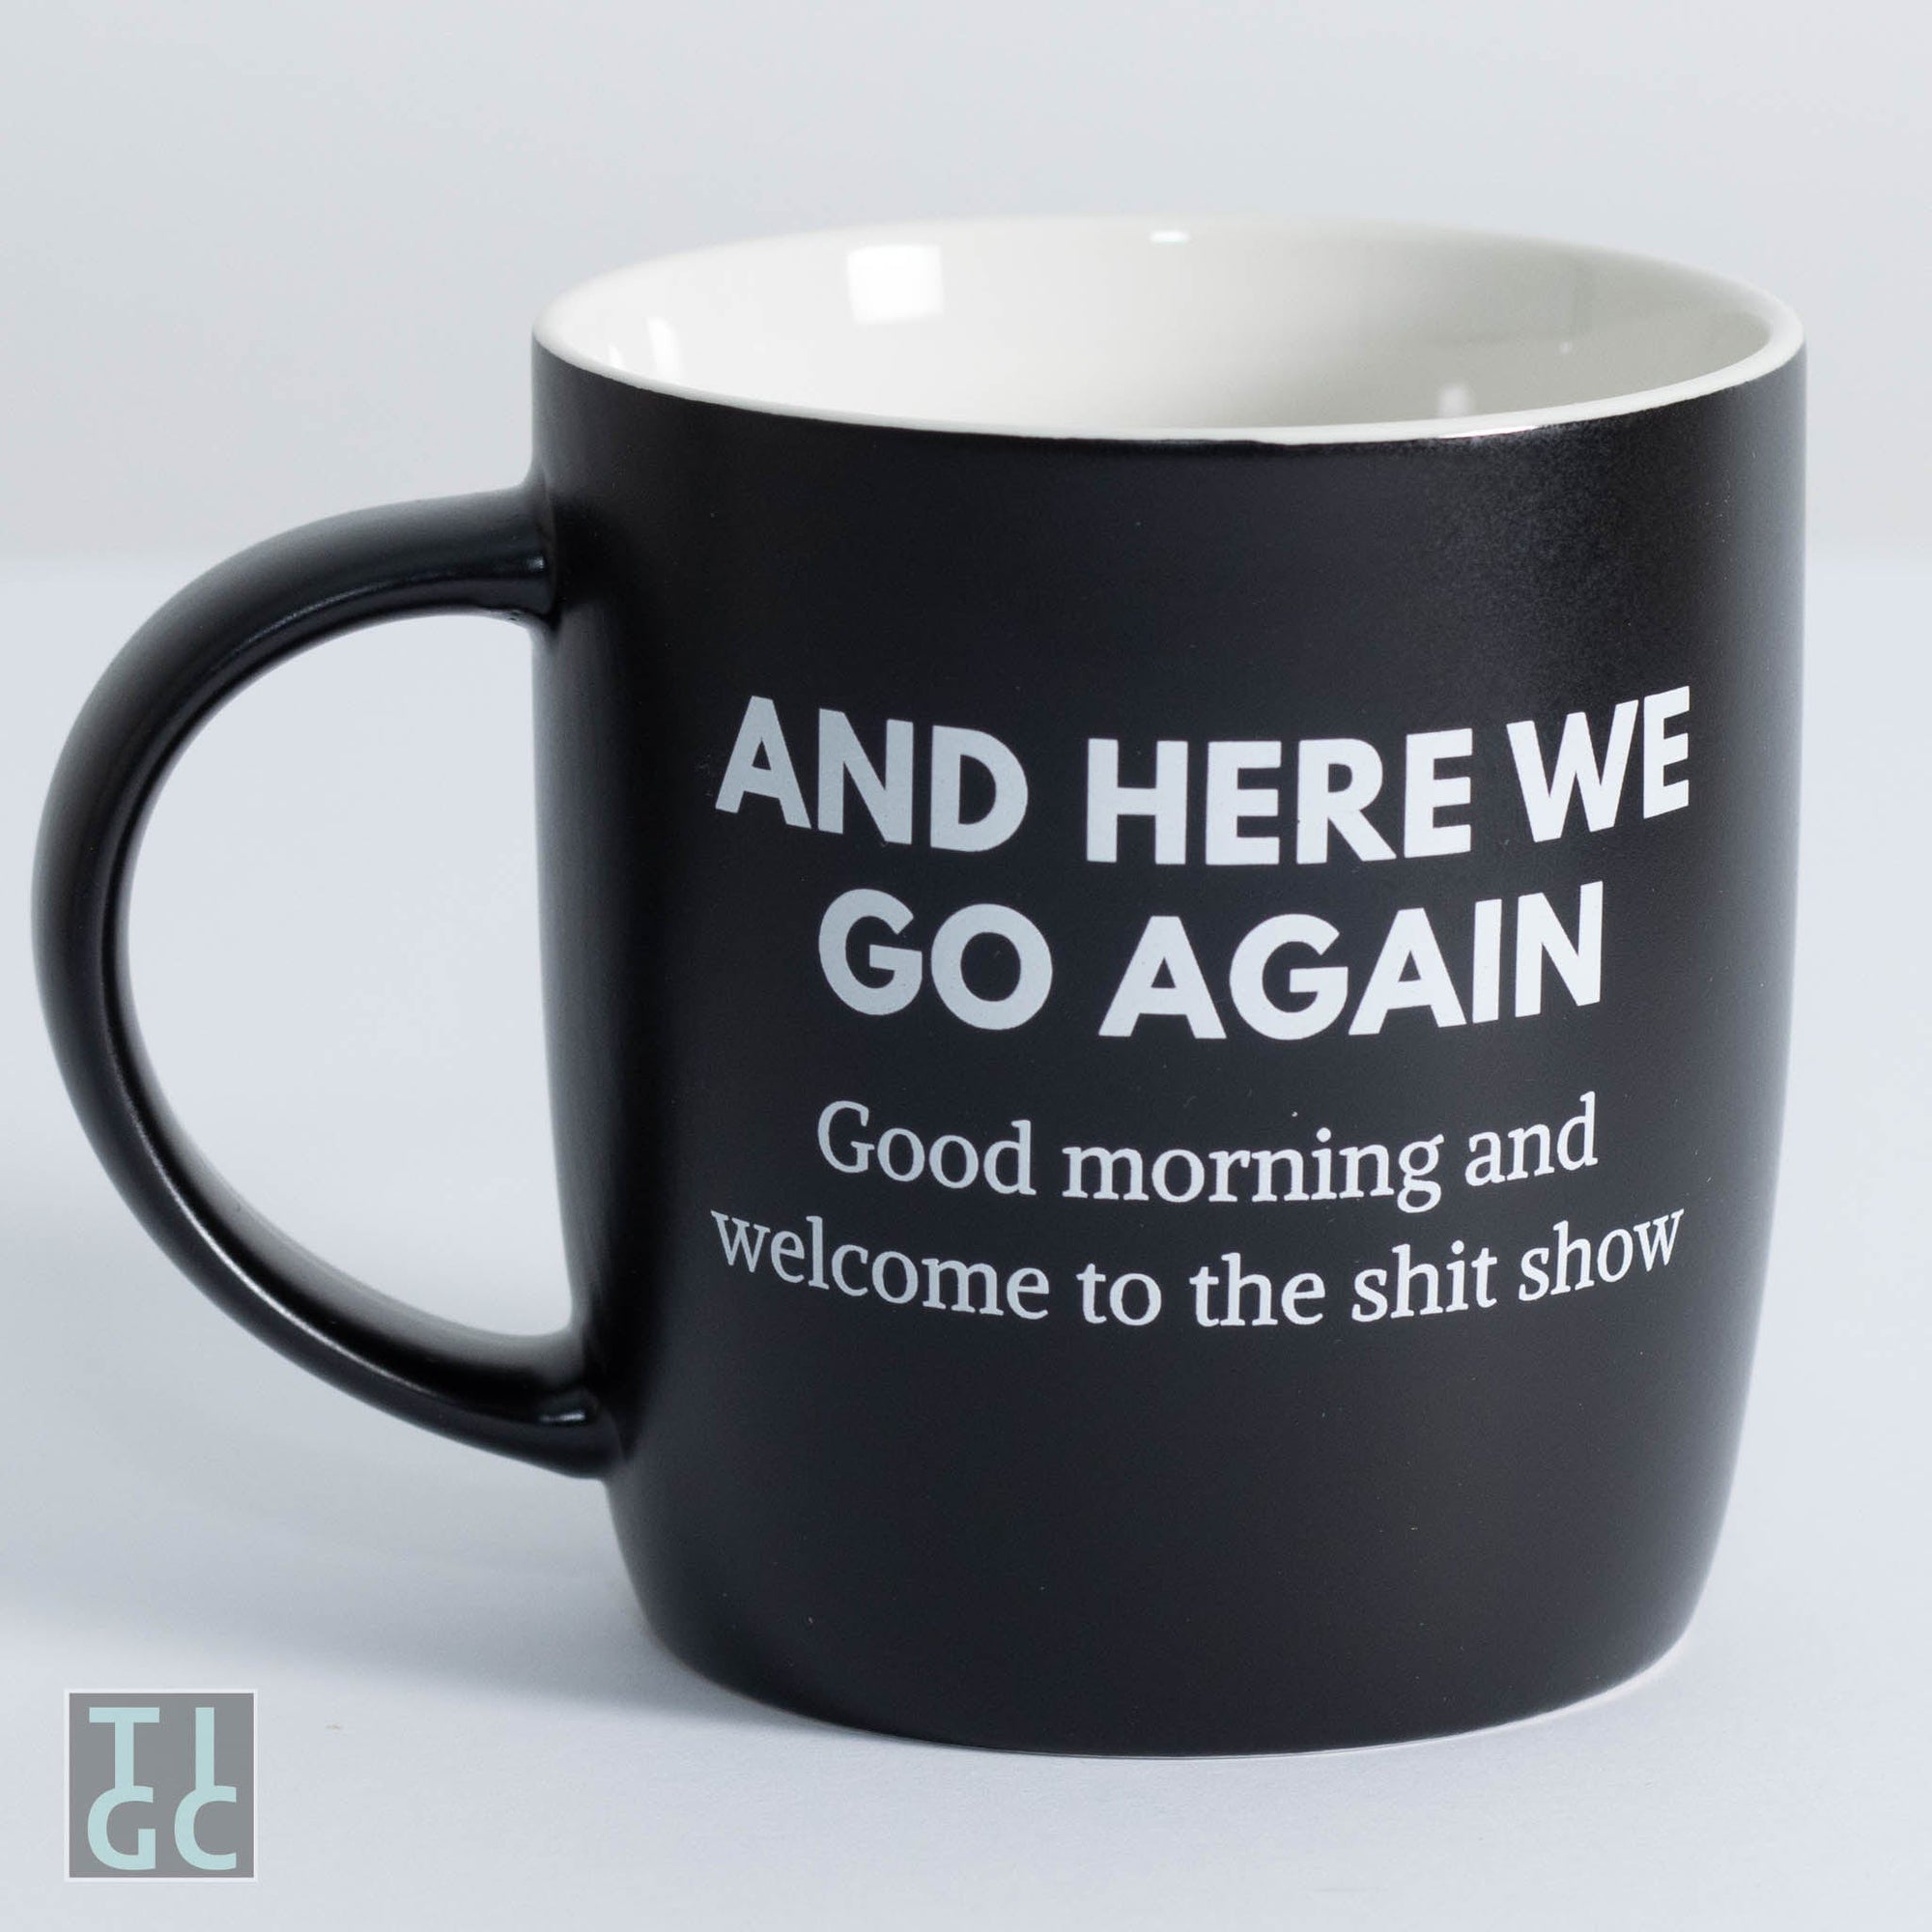 TIGC The Inappropriate Gift Co And here we go again mug